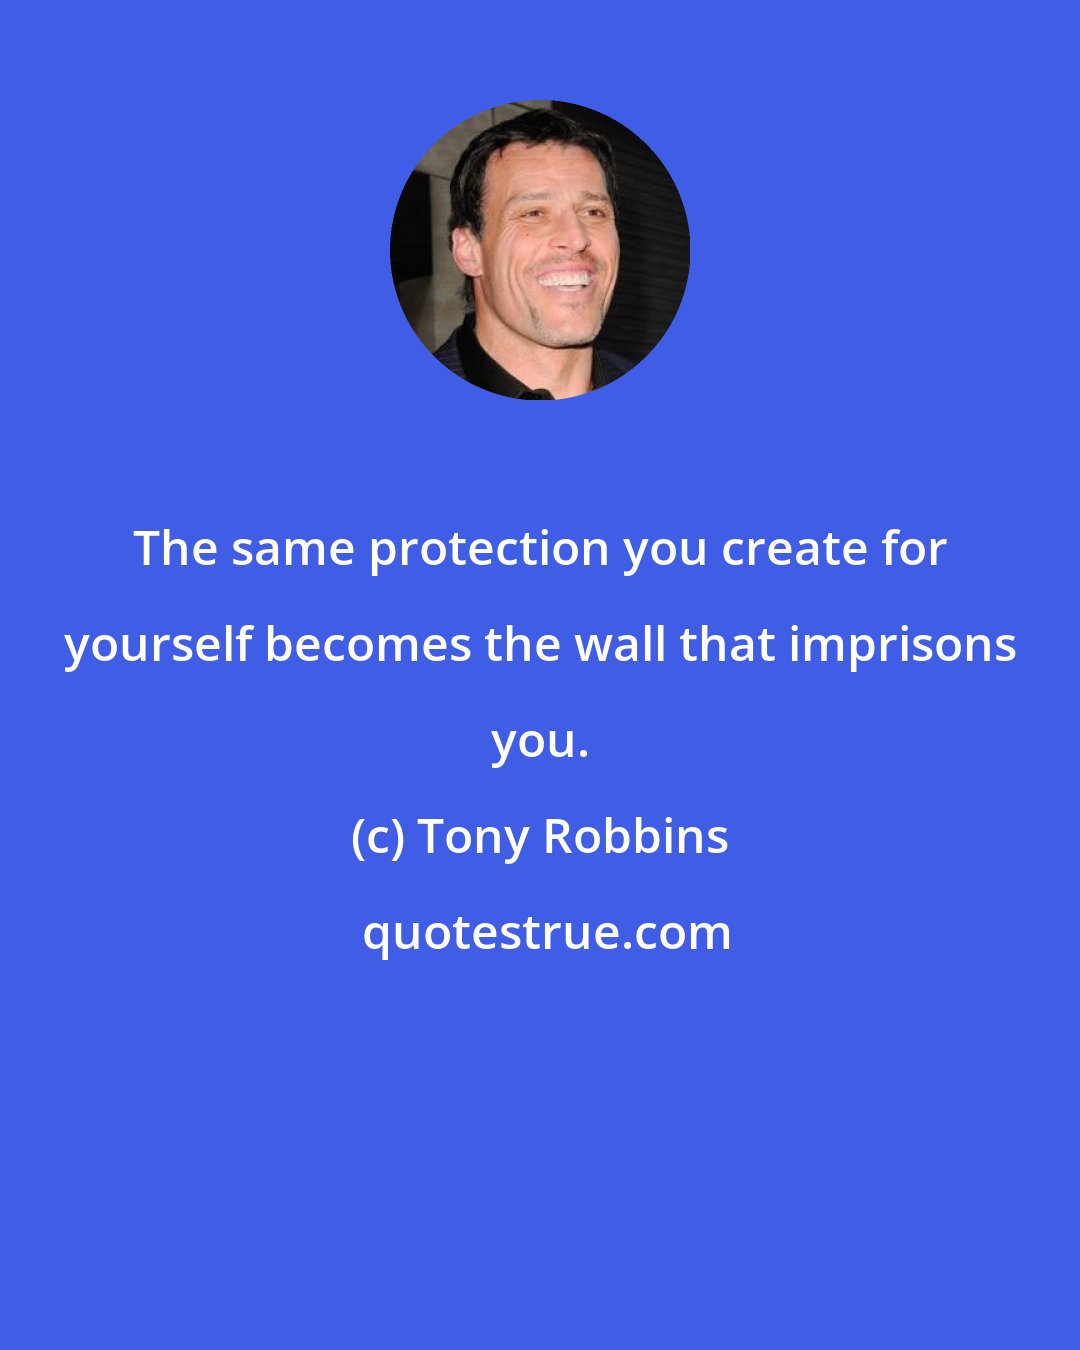 Tony Robbins: The same protection you create for yourself becomes the wall that imprisons you.